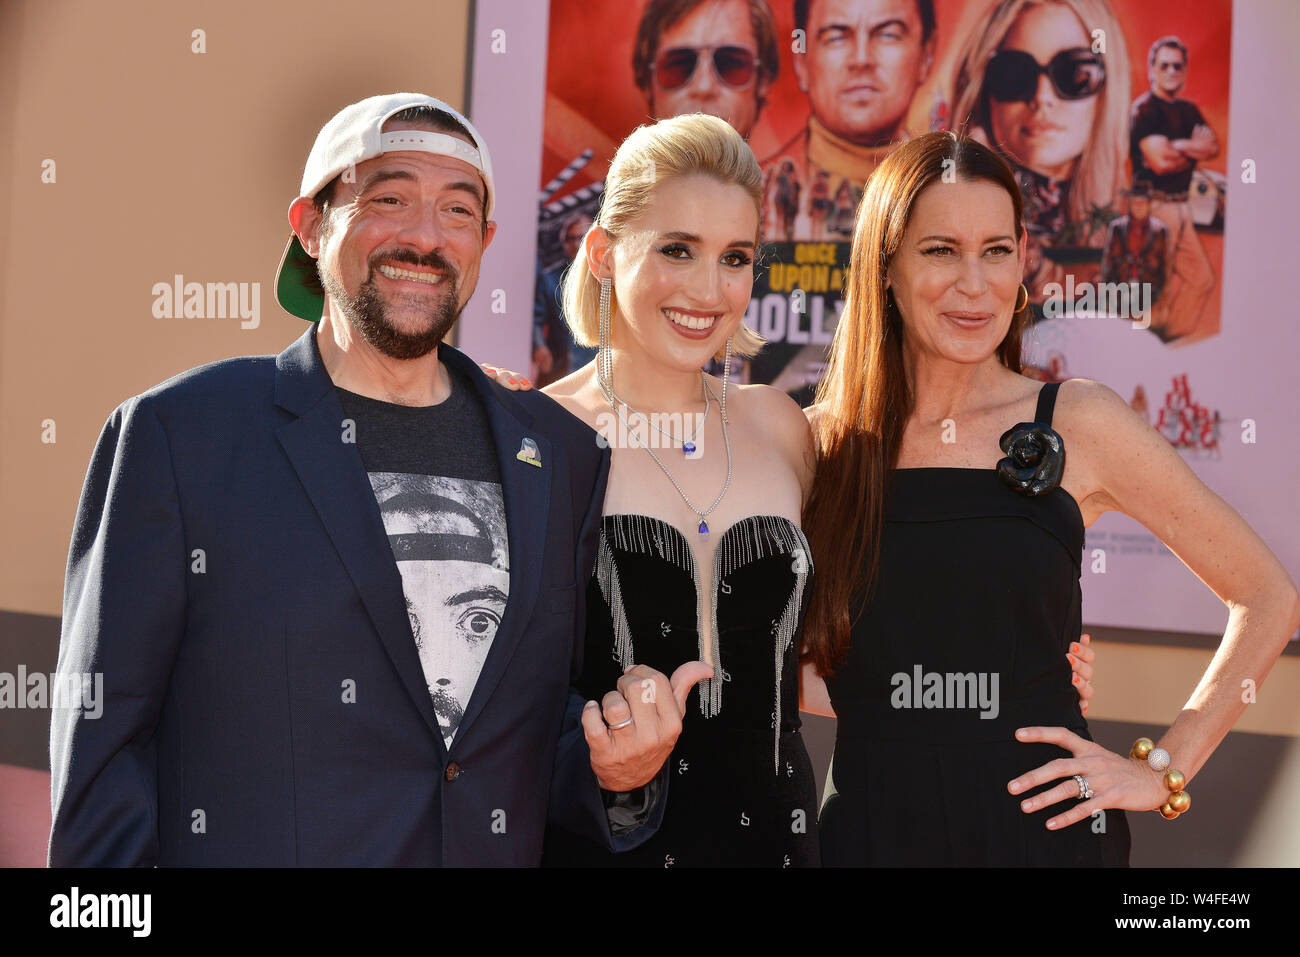 Los Angeles, USA. 22nd July, 2019. Kevin Smith, Jennifer Schwalbach Smith arrives at the Sony Pictures' 'Once Upon A Time.In Hollywood premiere at the TCL Chinese Theatre in Los Angeles on July 22, 2019 in Hollywood, California Credit: Tsuni/USA/Alamy Live News Stock Photo